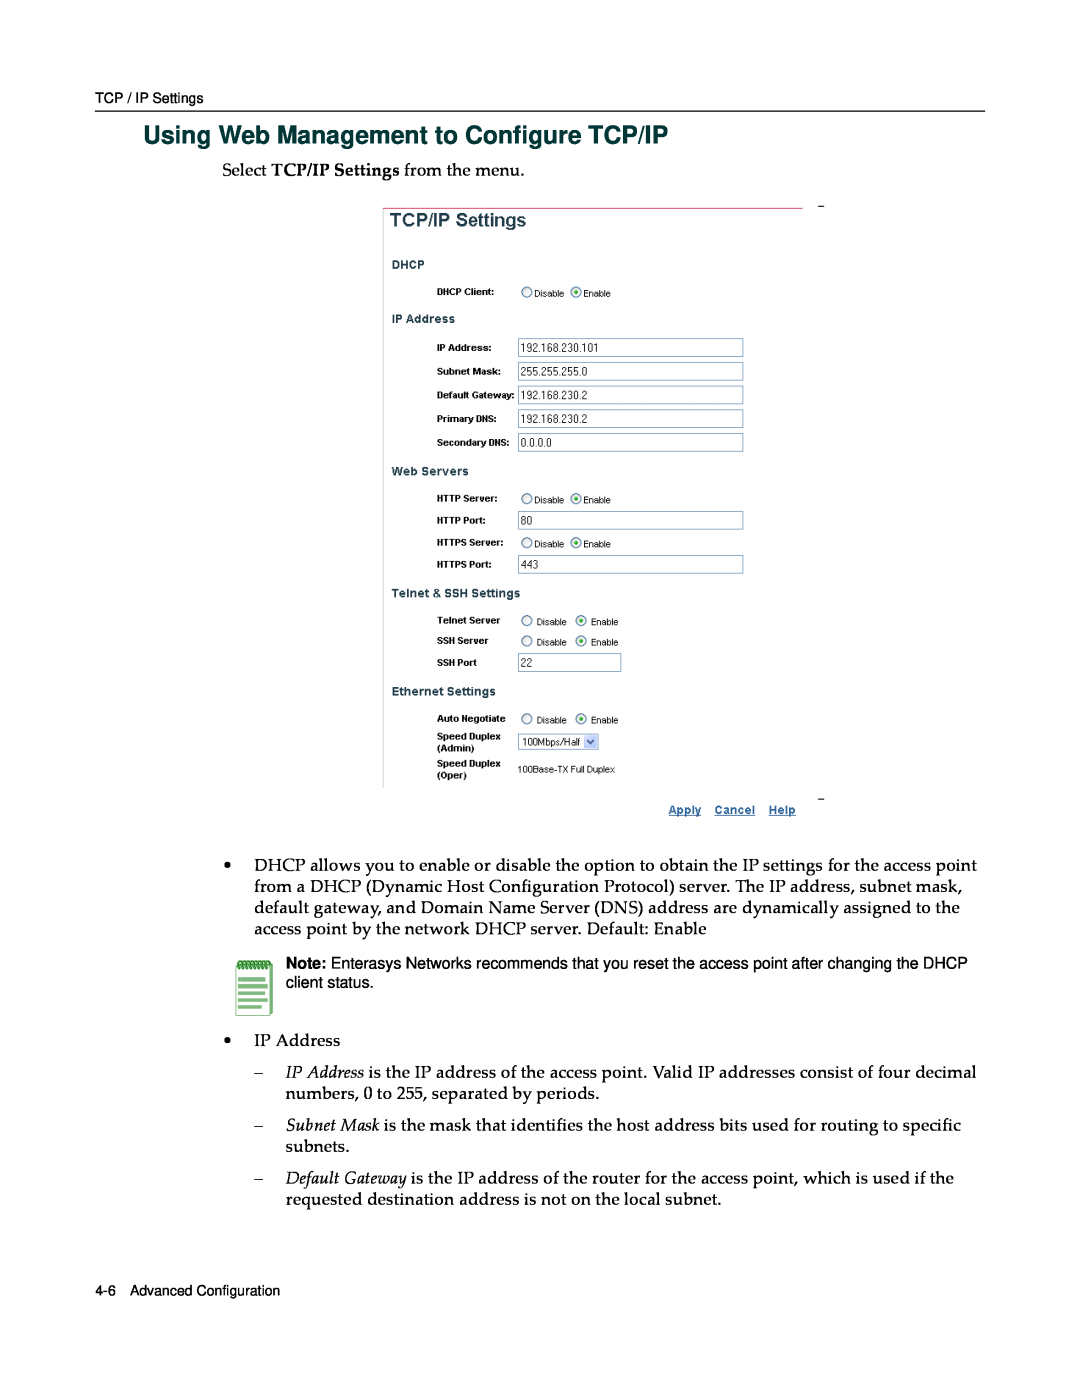 Enterasys Networks RBT-4102 manual Using Web Management to Configure TCP/IP 